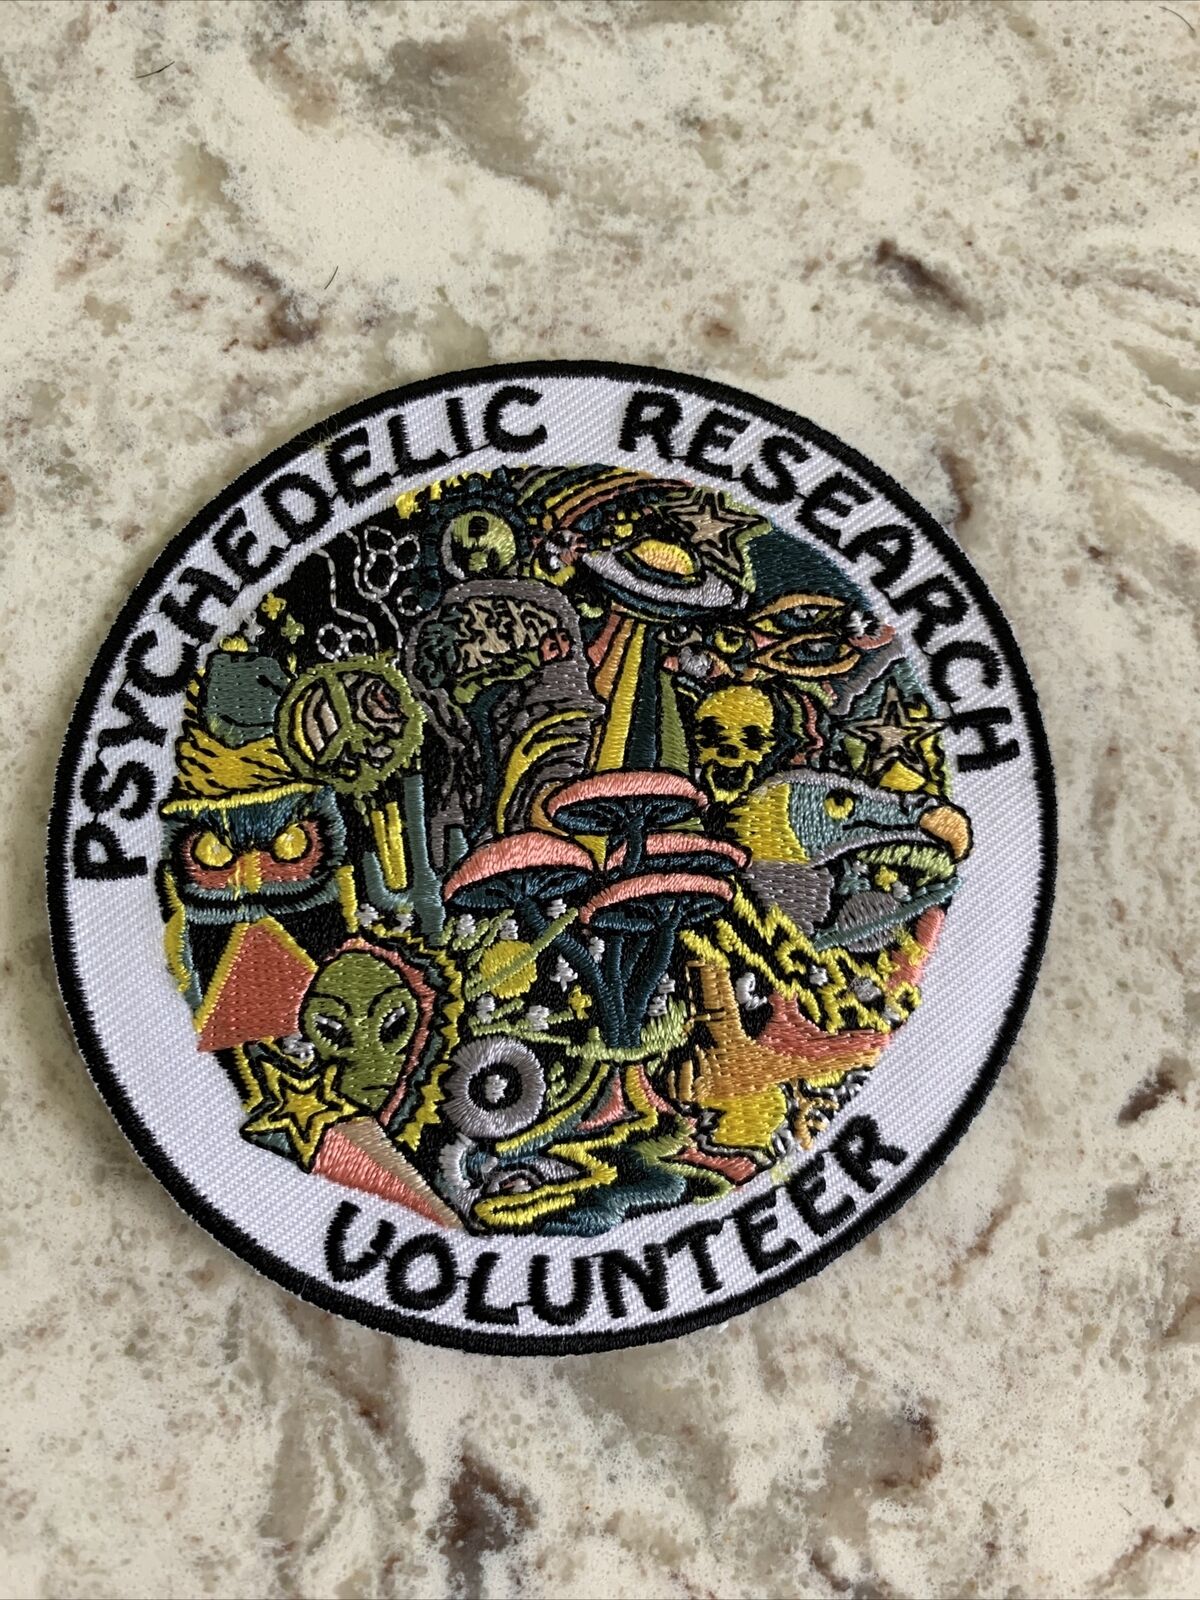 Original Psychedelic Researcher Volunteer Iron-On/Sew-On 3.5” Embroidered